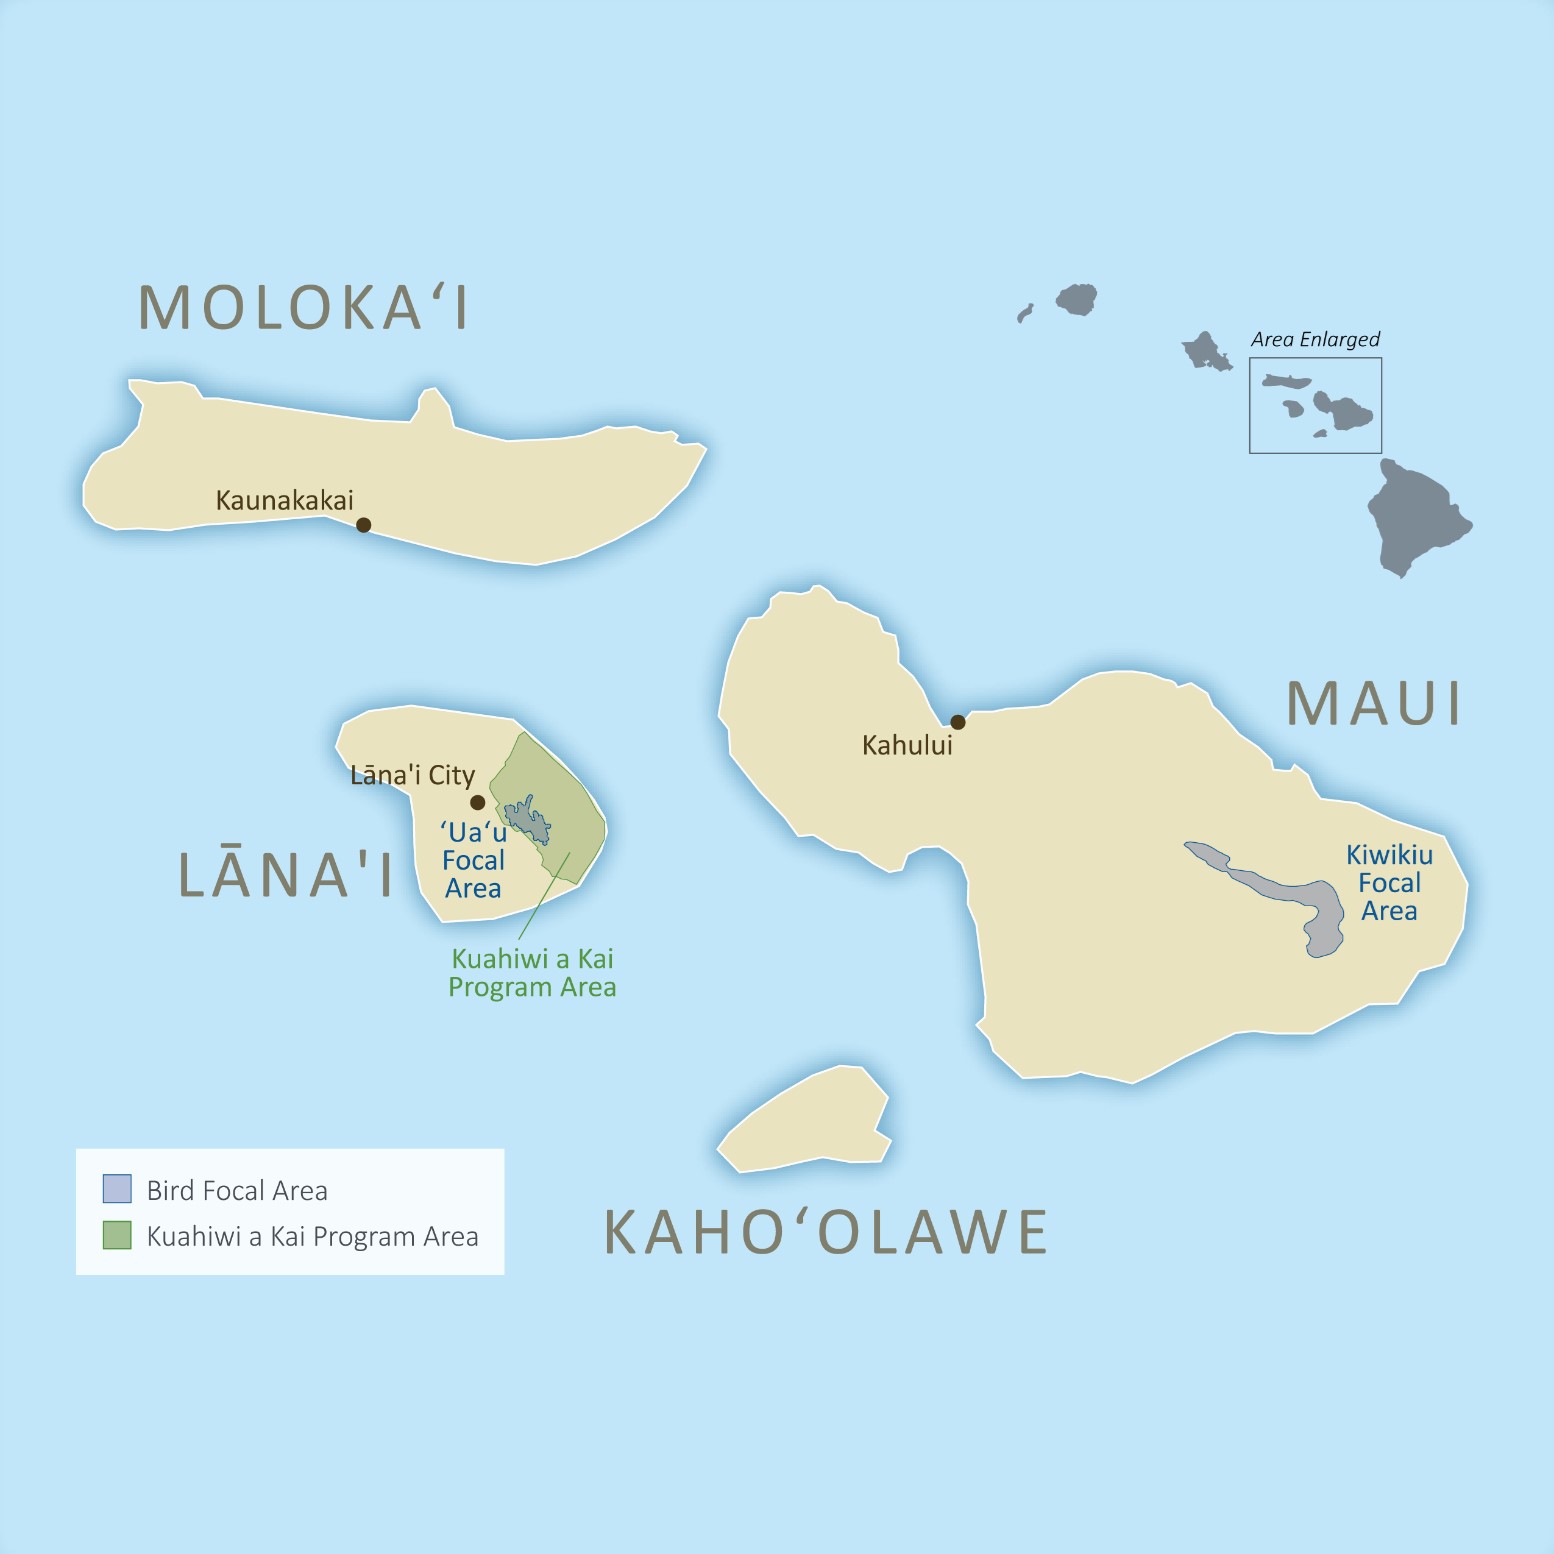 Priority Geography for Maui Nui